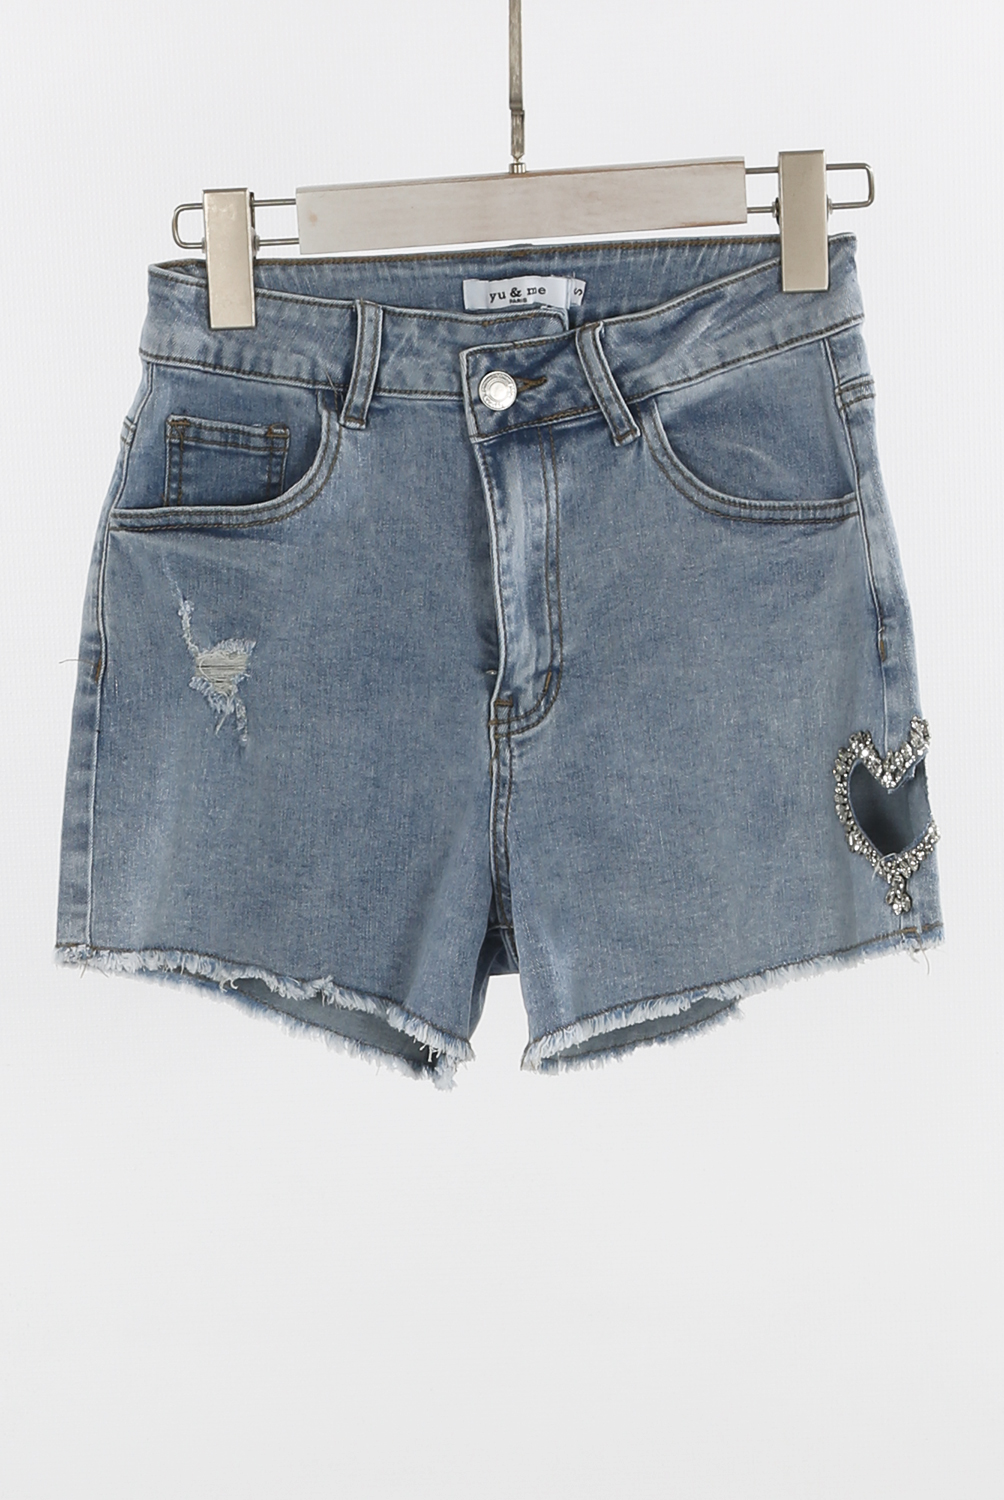 How To Turn Jeans Into Shorts (with lace, trim, and embellishments!)